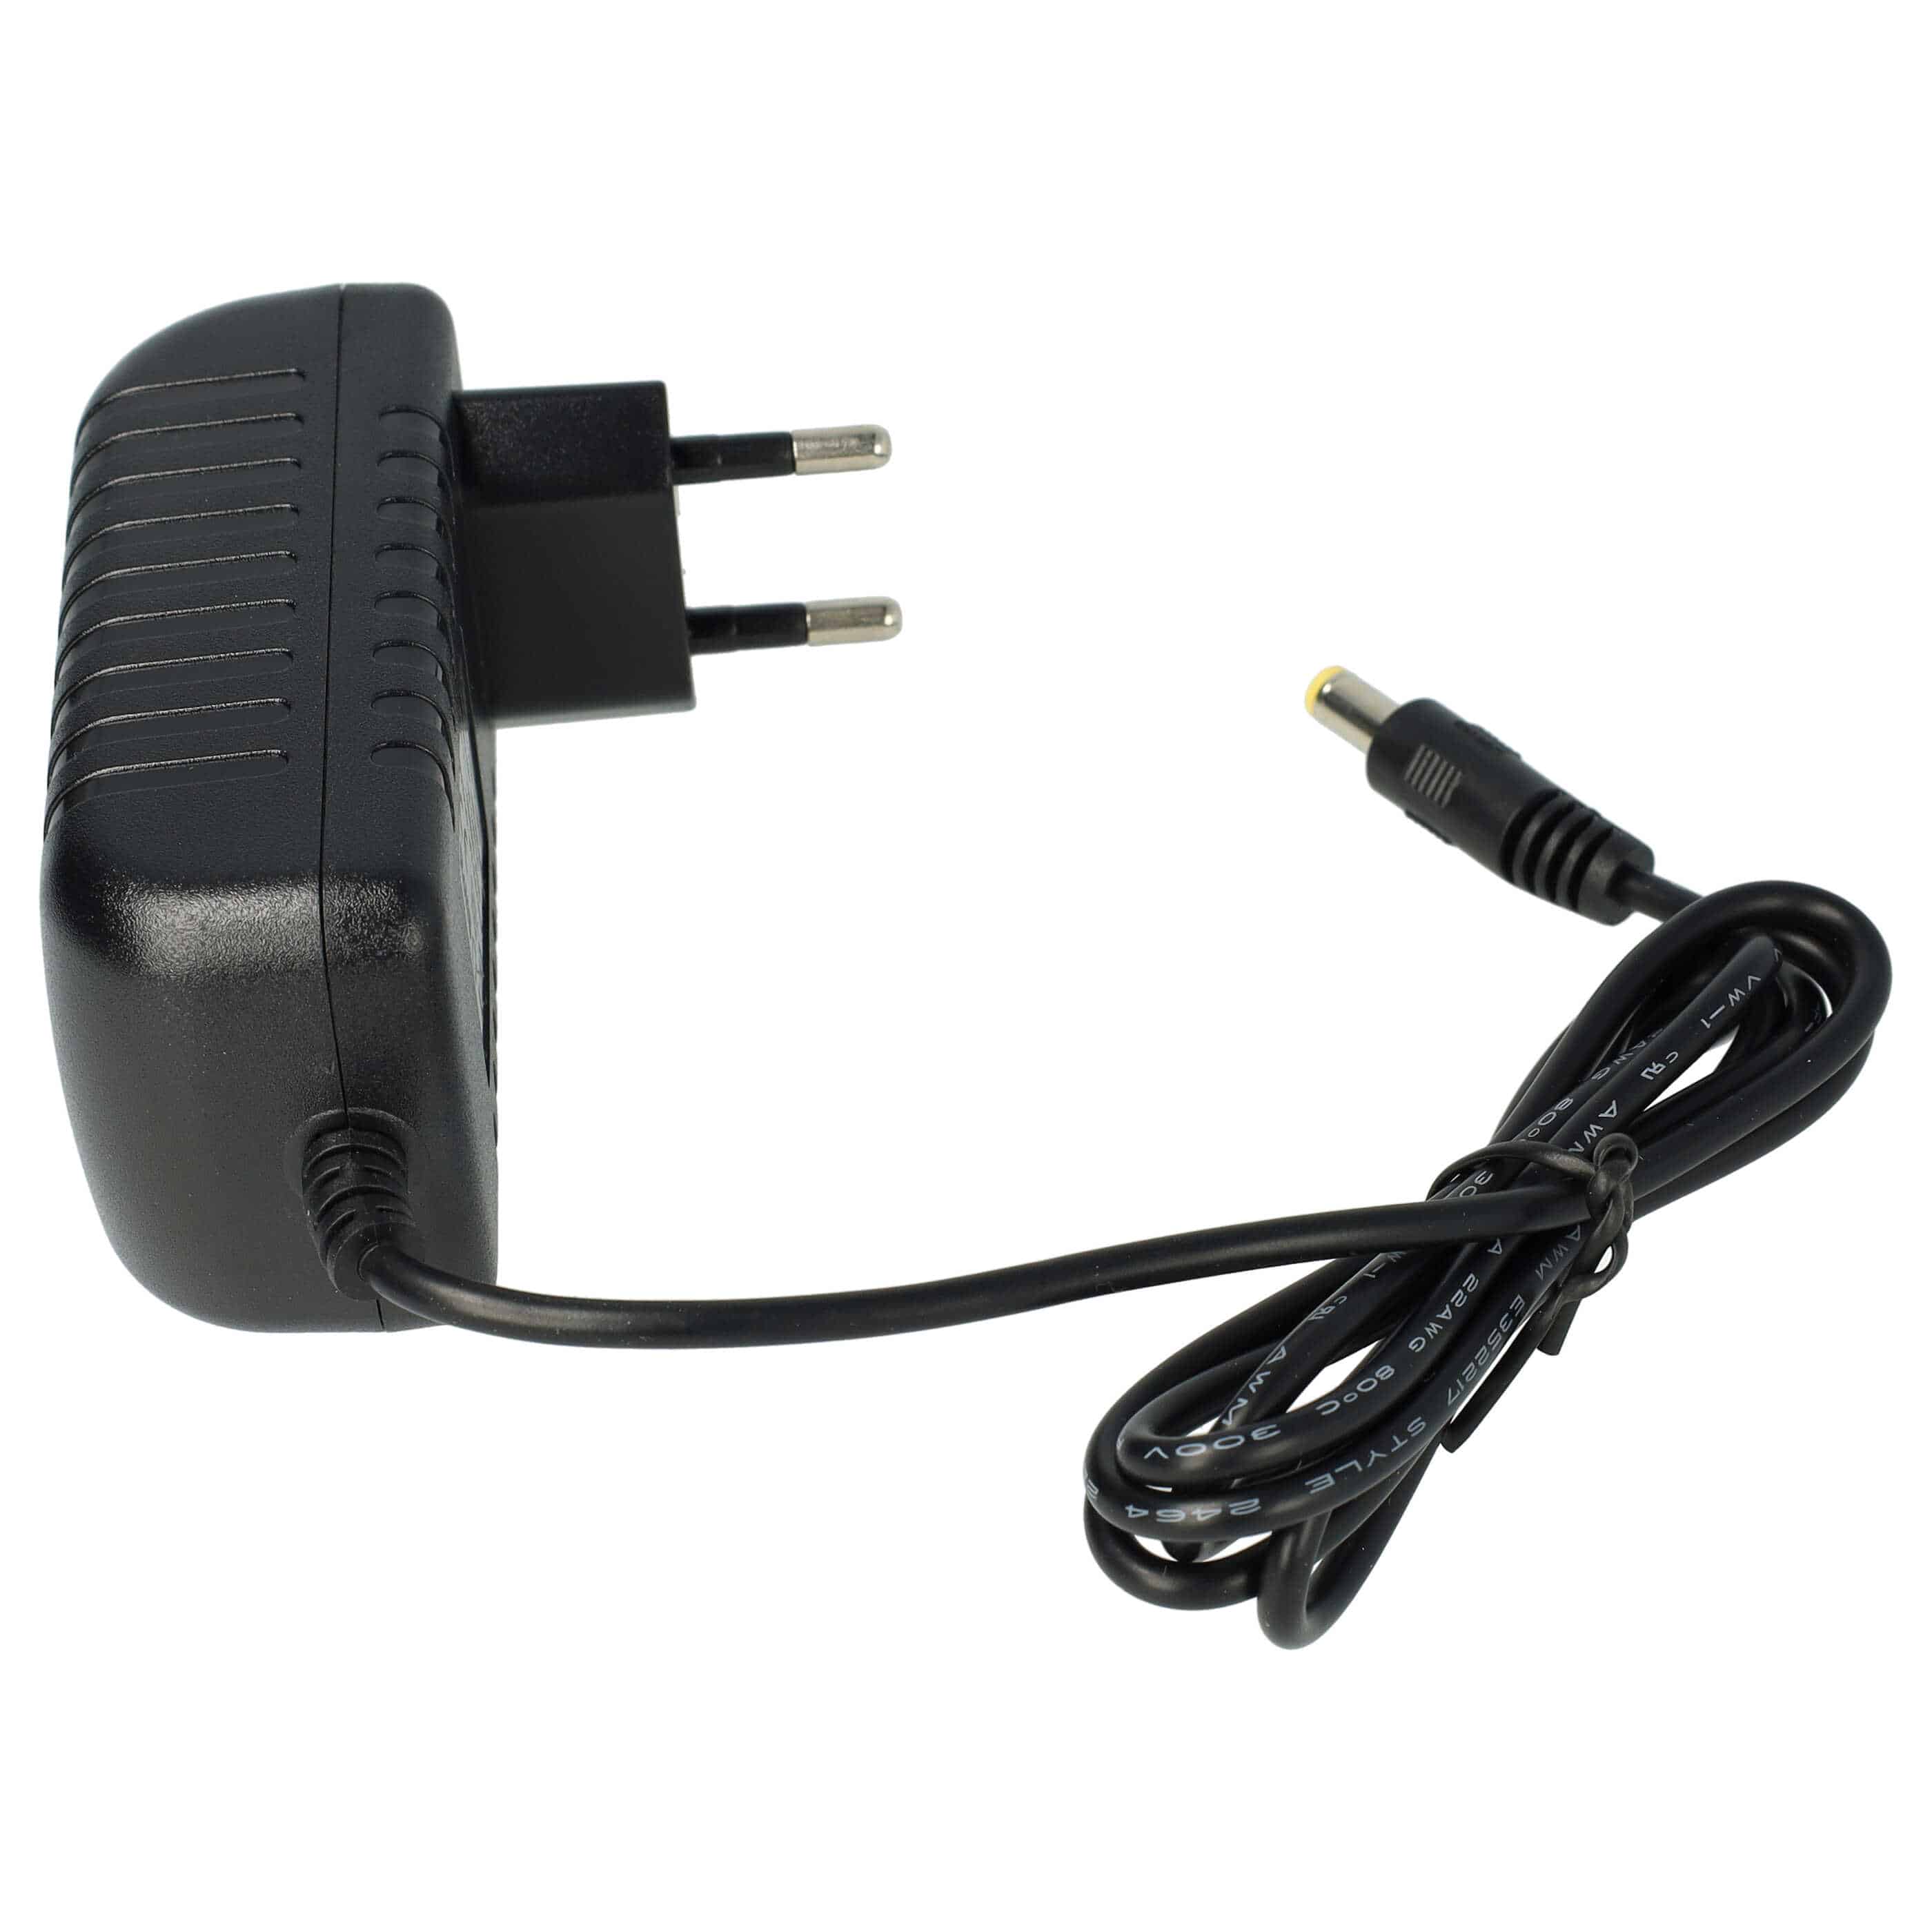 Mains Power Adapter with 5.5 x 2.5 mm Plug suitable for various Electric Devices - 18 V, 2 A